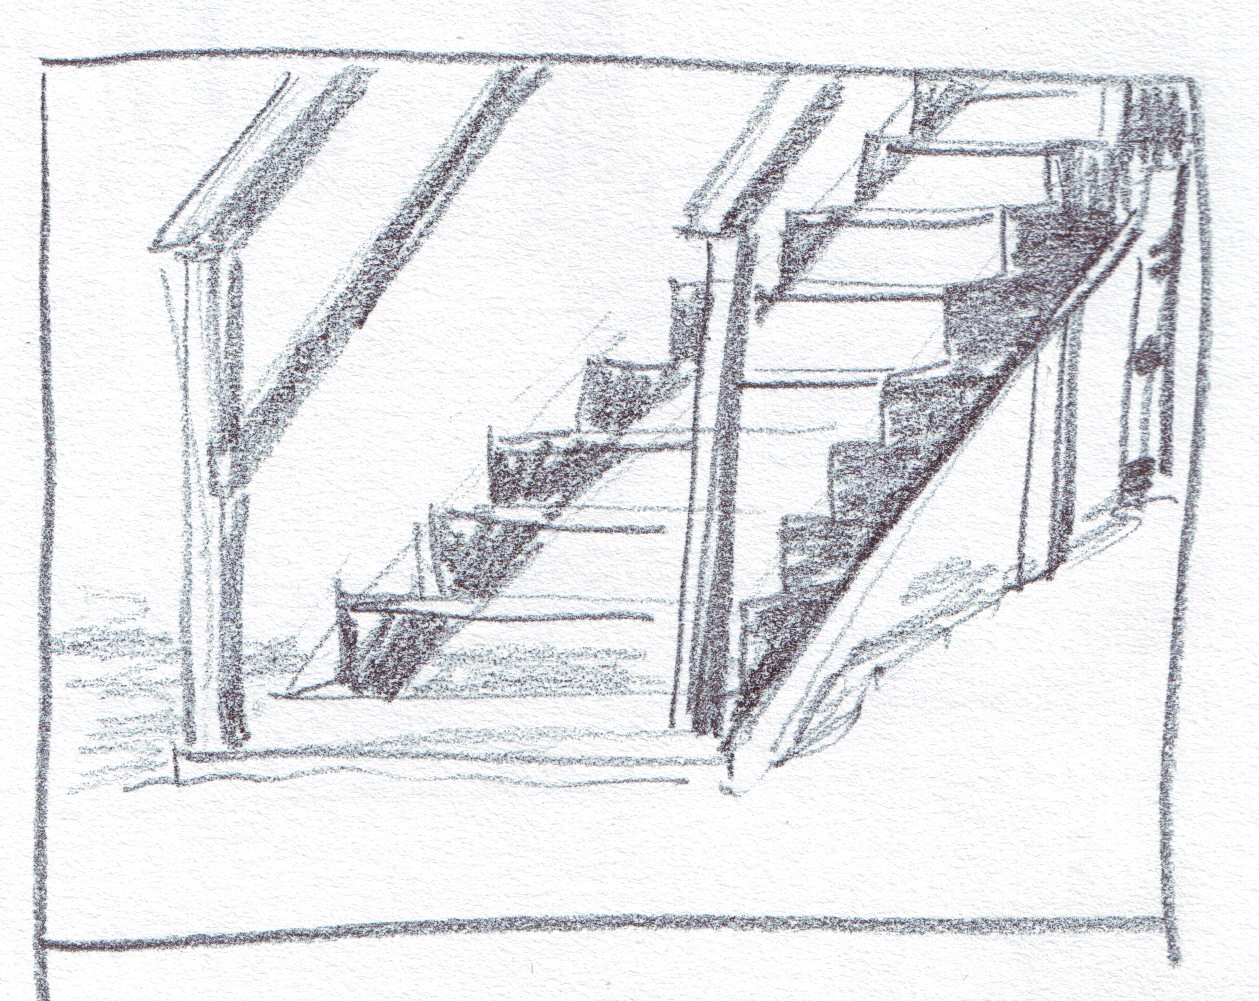 [stairs1]